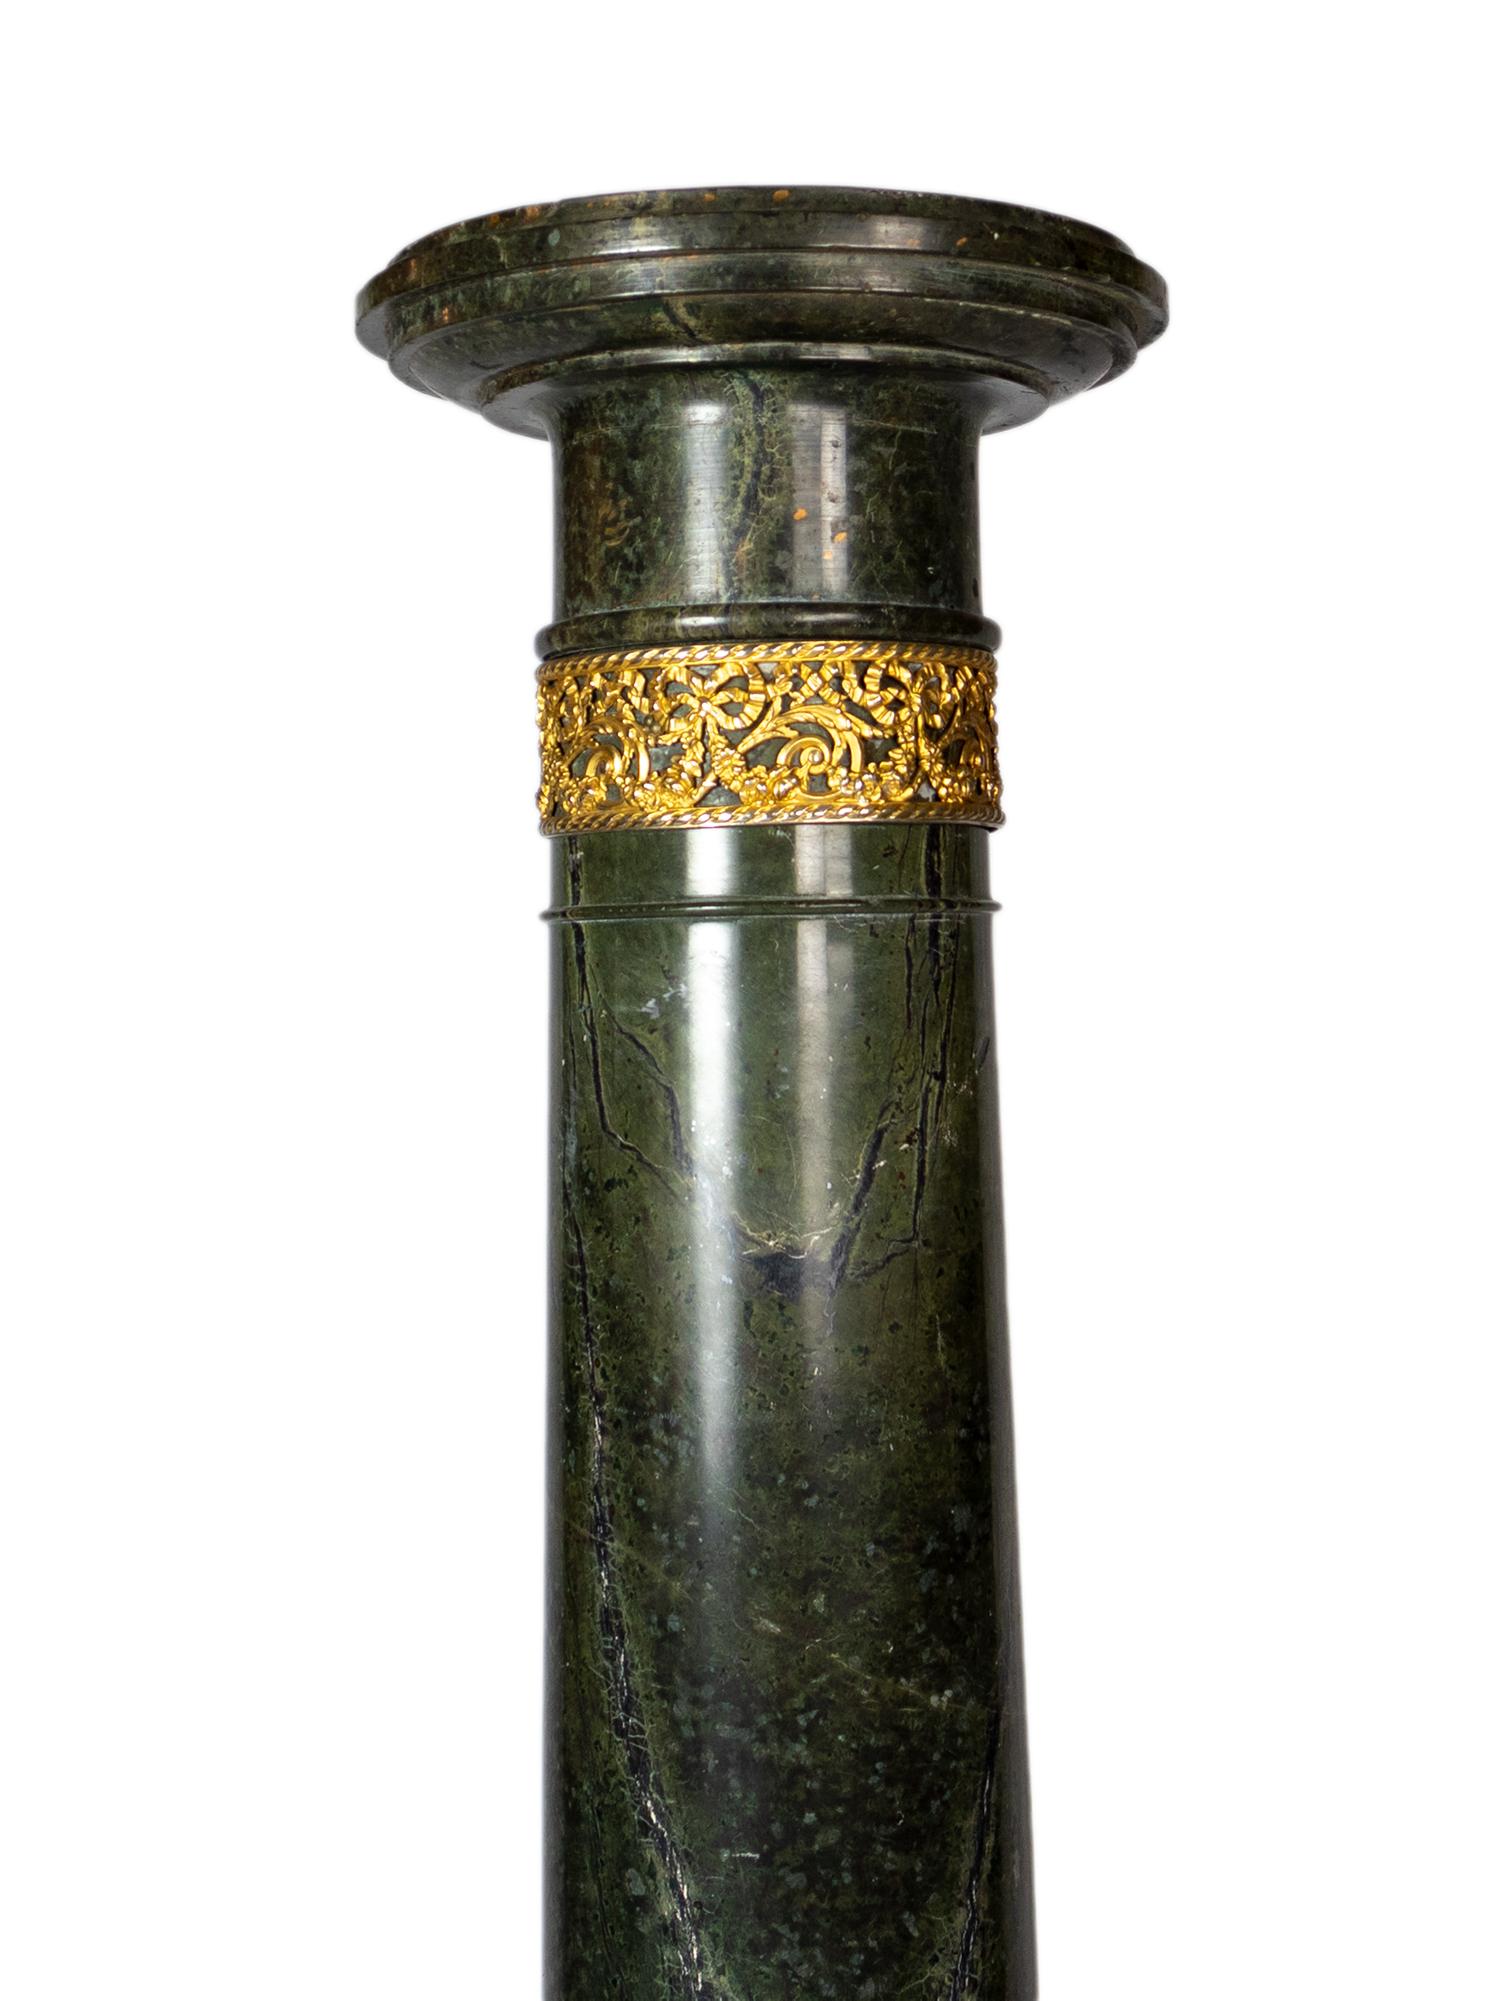 A neoclassical alpine green marble column, gilded bronze.
A late 19th century pedestal for the classic decor.   

